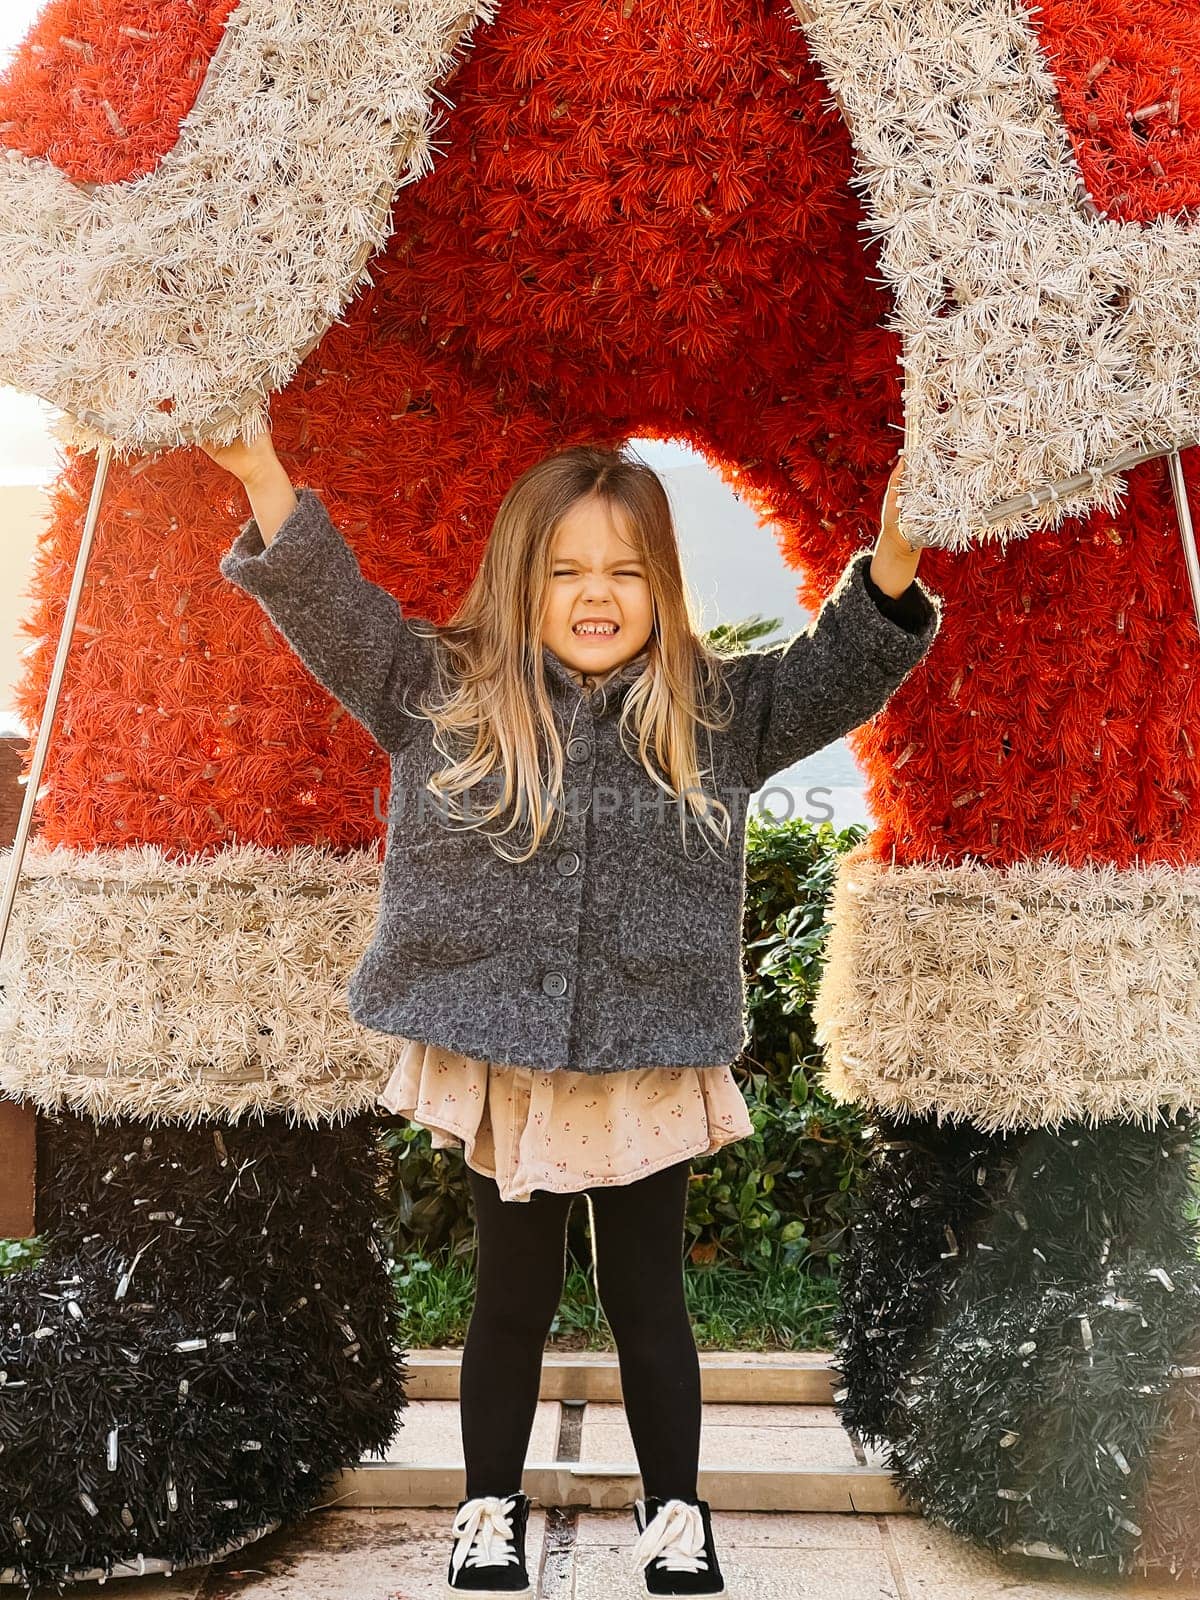 Little girl stands near a big fluffy figure of Santa Claus by Nadtochiy